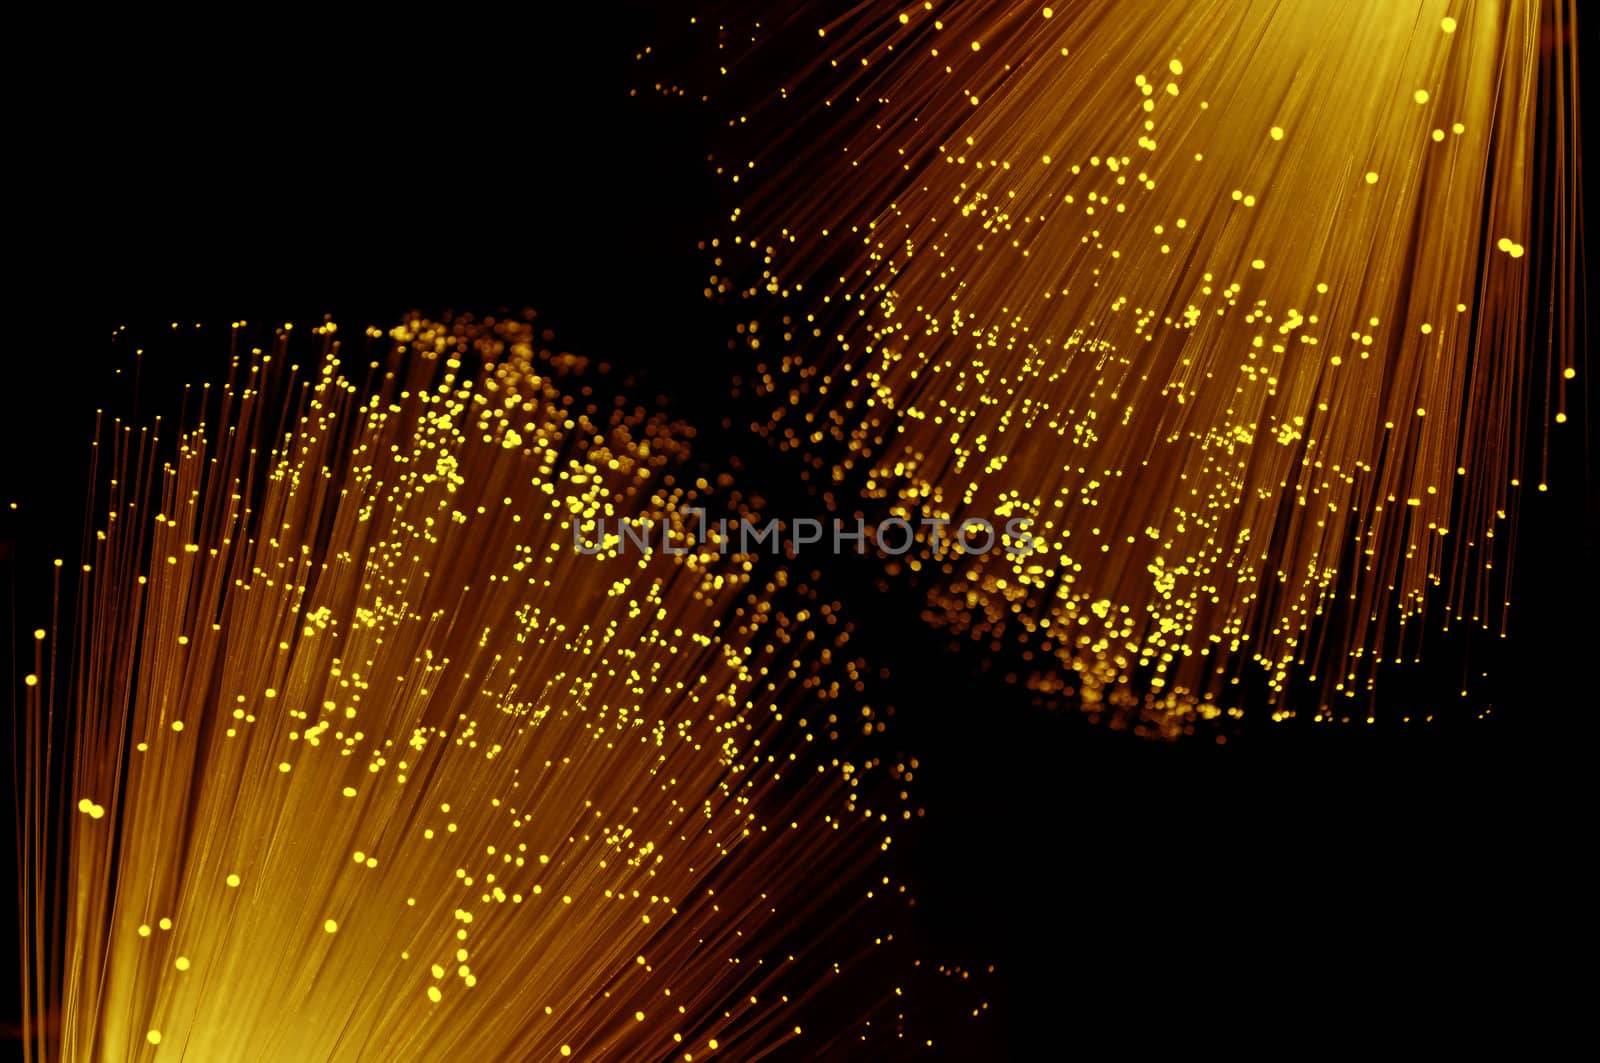 Close up capturing the ends of many illuminated orange, red and yellow coloured fibre optic light strands against a black background.